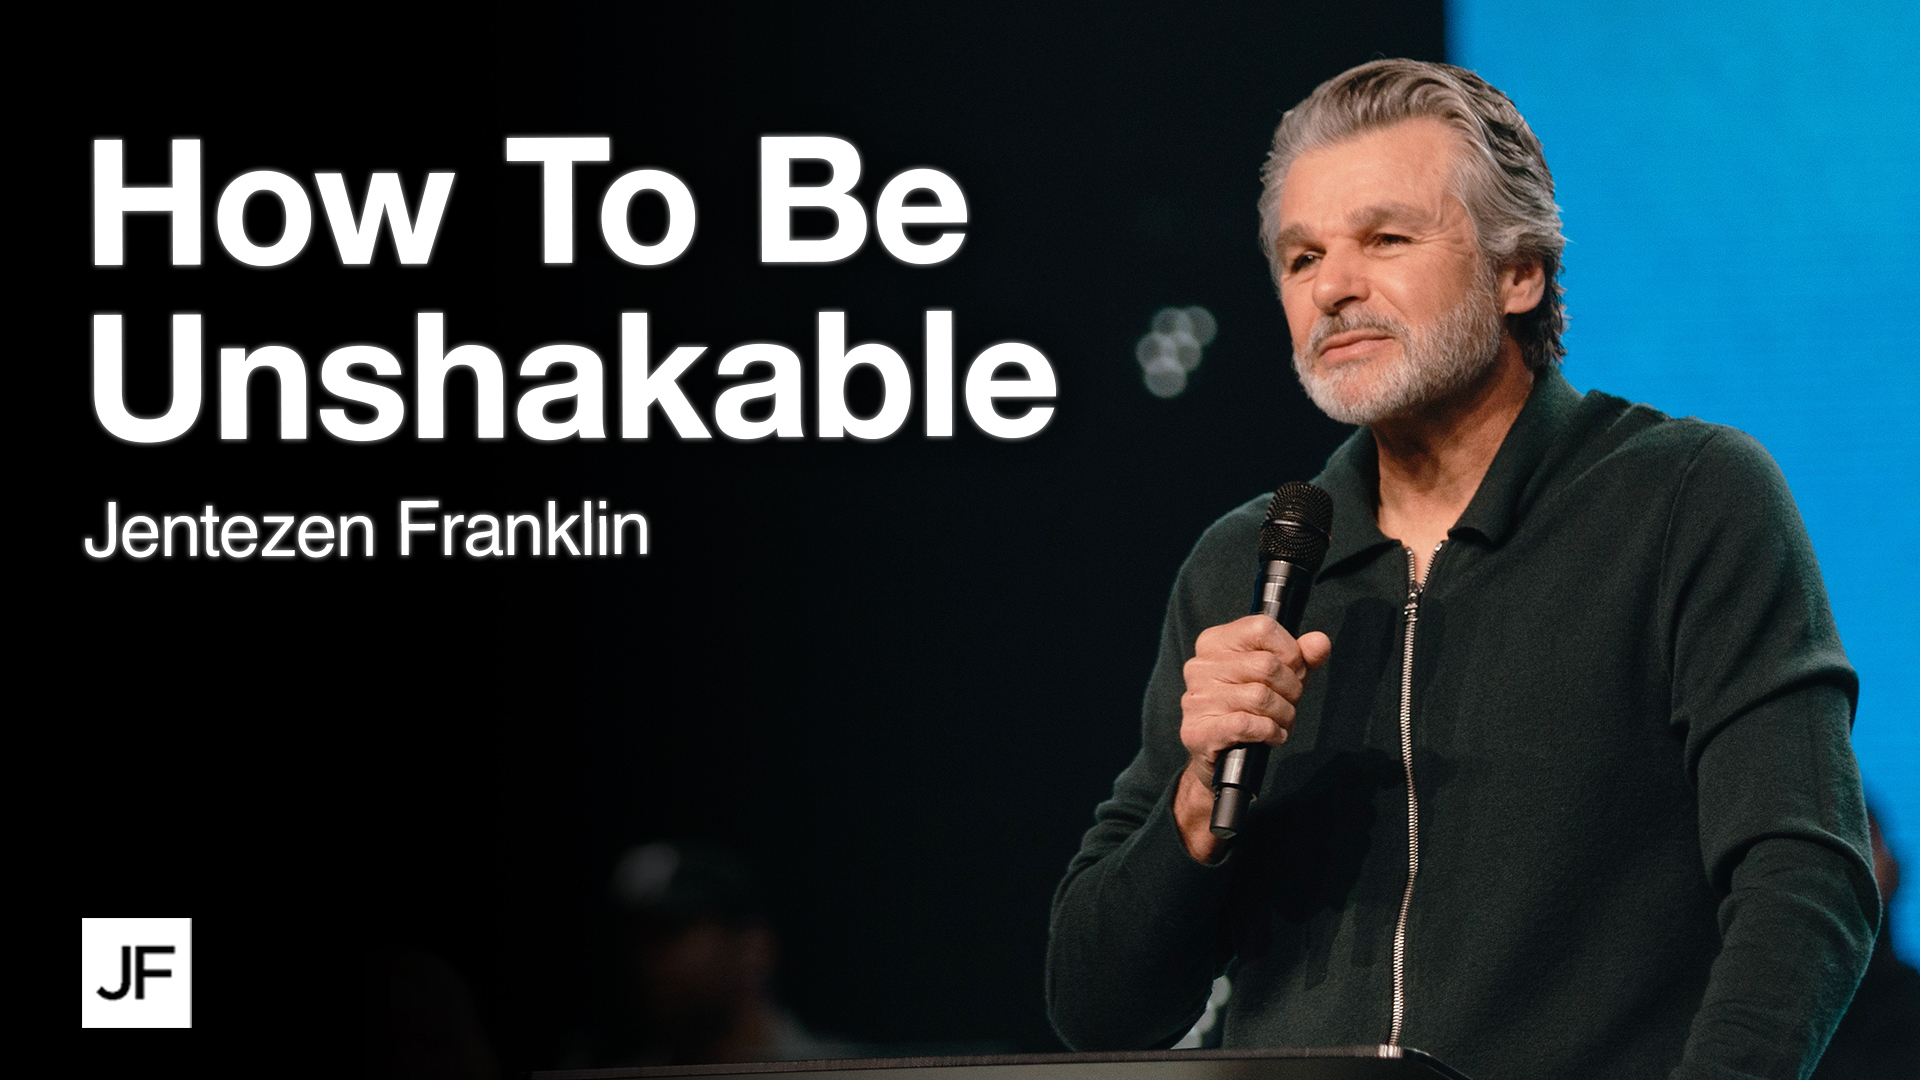 How to Be Unshakable